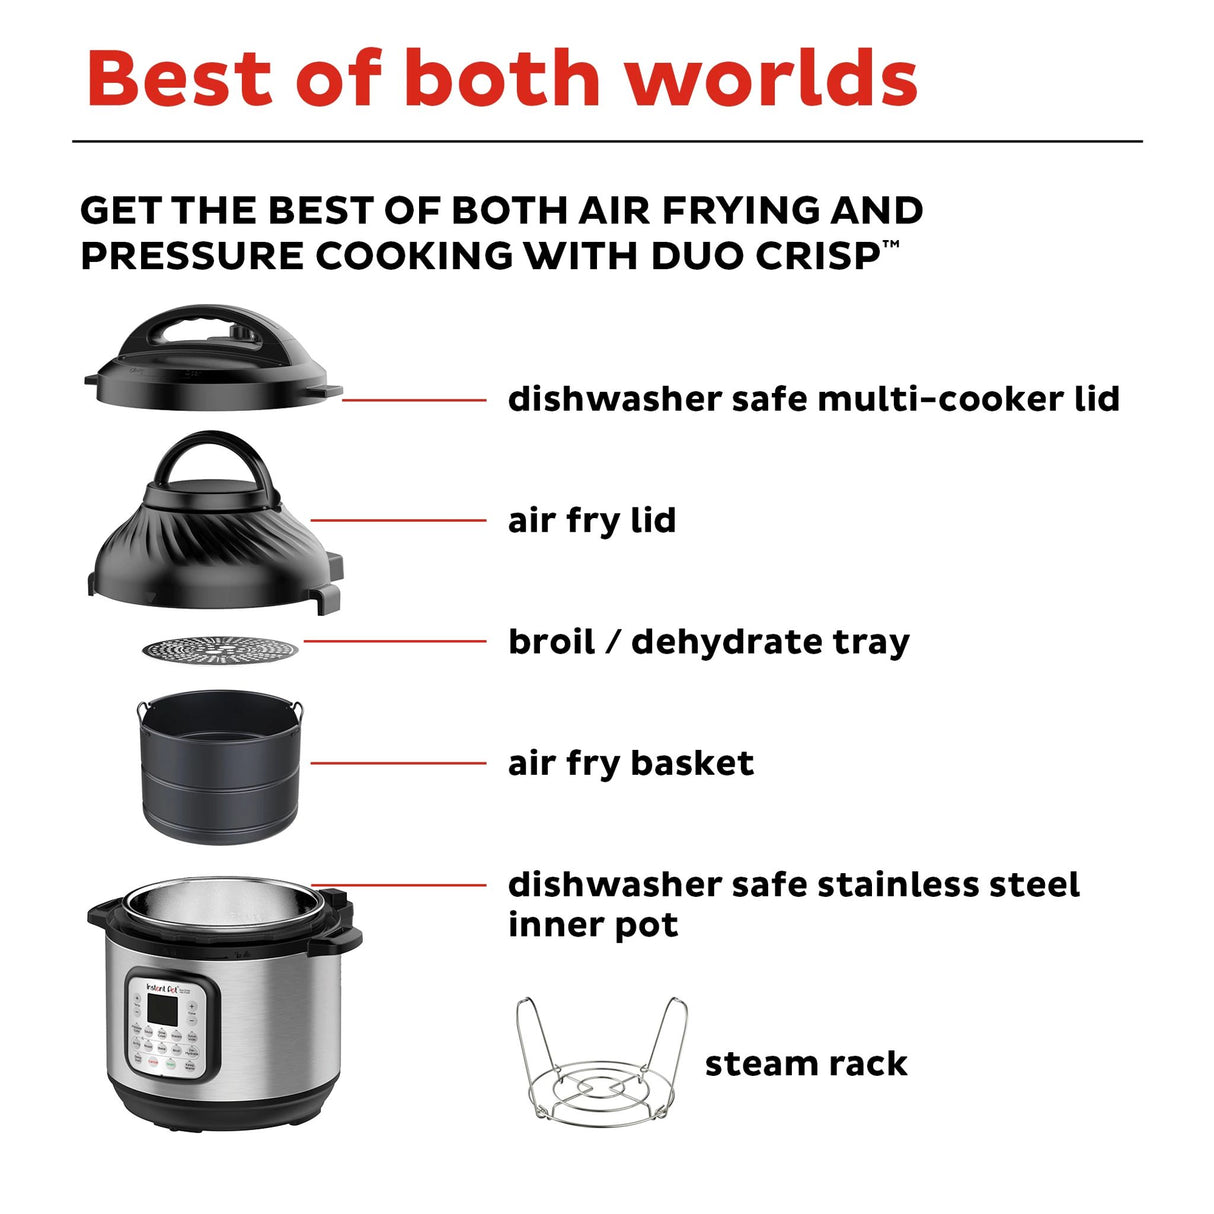  Instant Pot Duo Crisp and Air Fryer 6-quart Multi-Use Pressure Cooker with text Best of both worlds